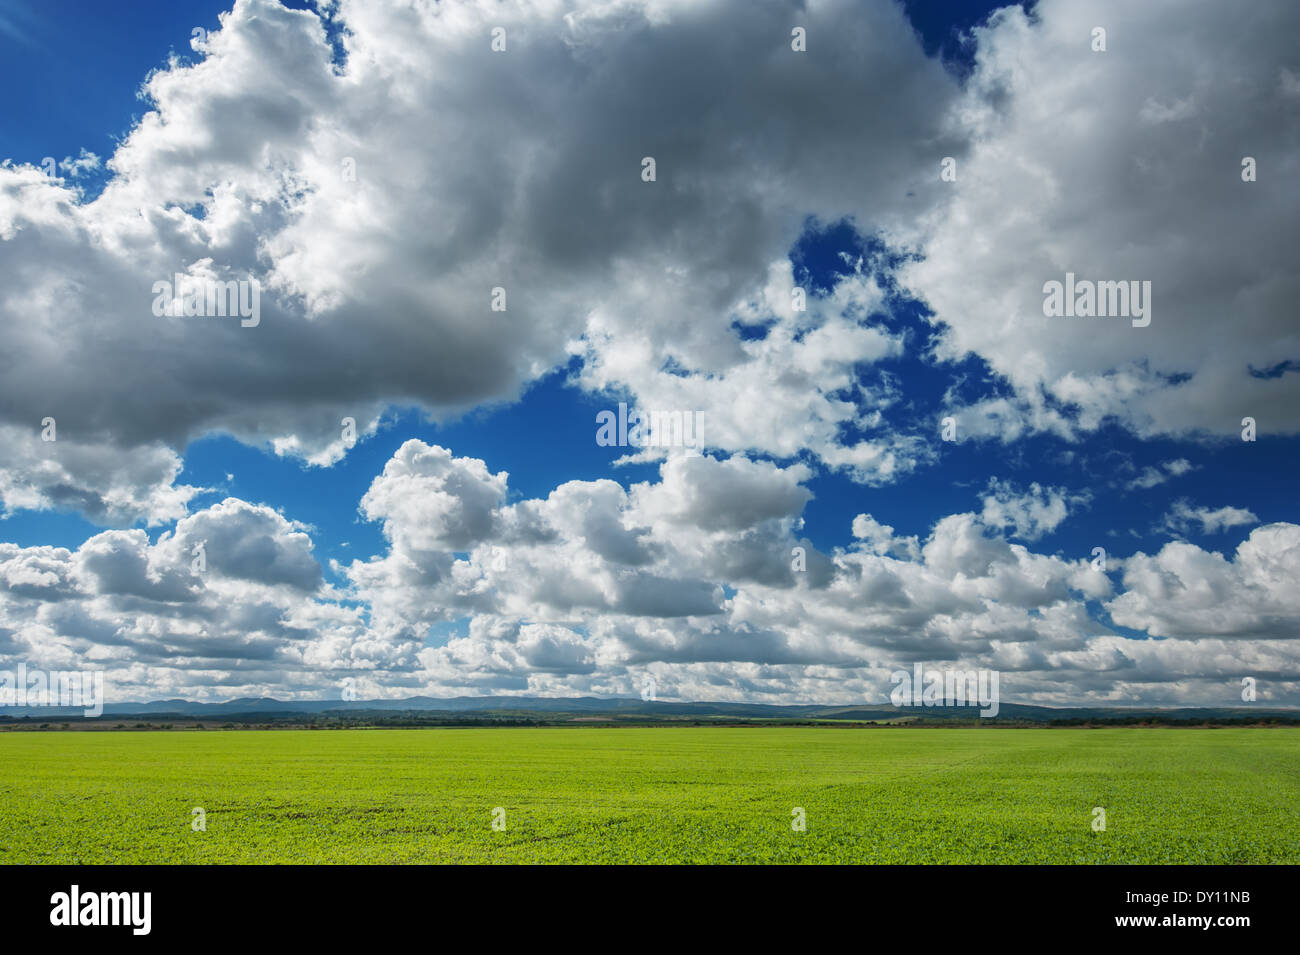 spring field and cloudy sky Stock Photo